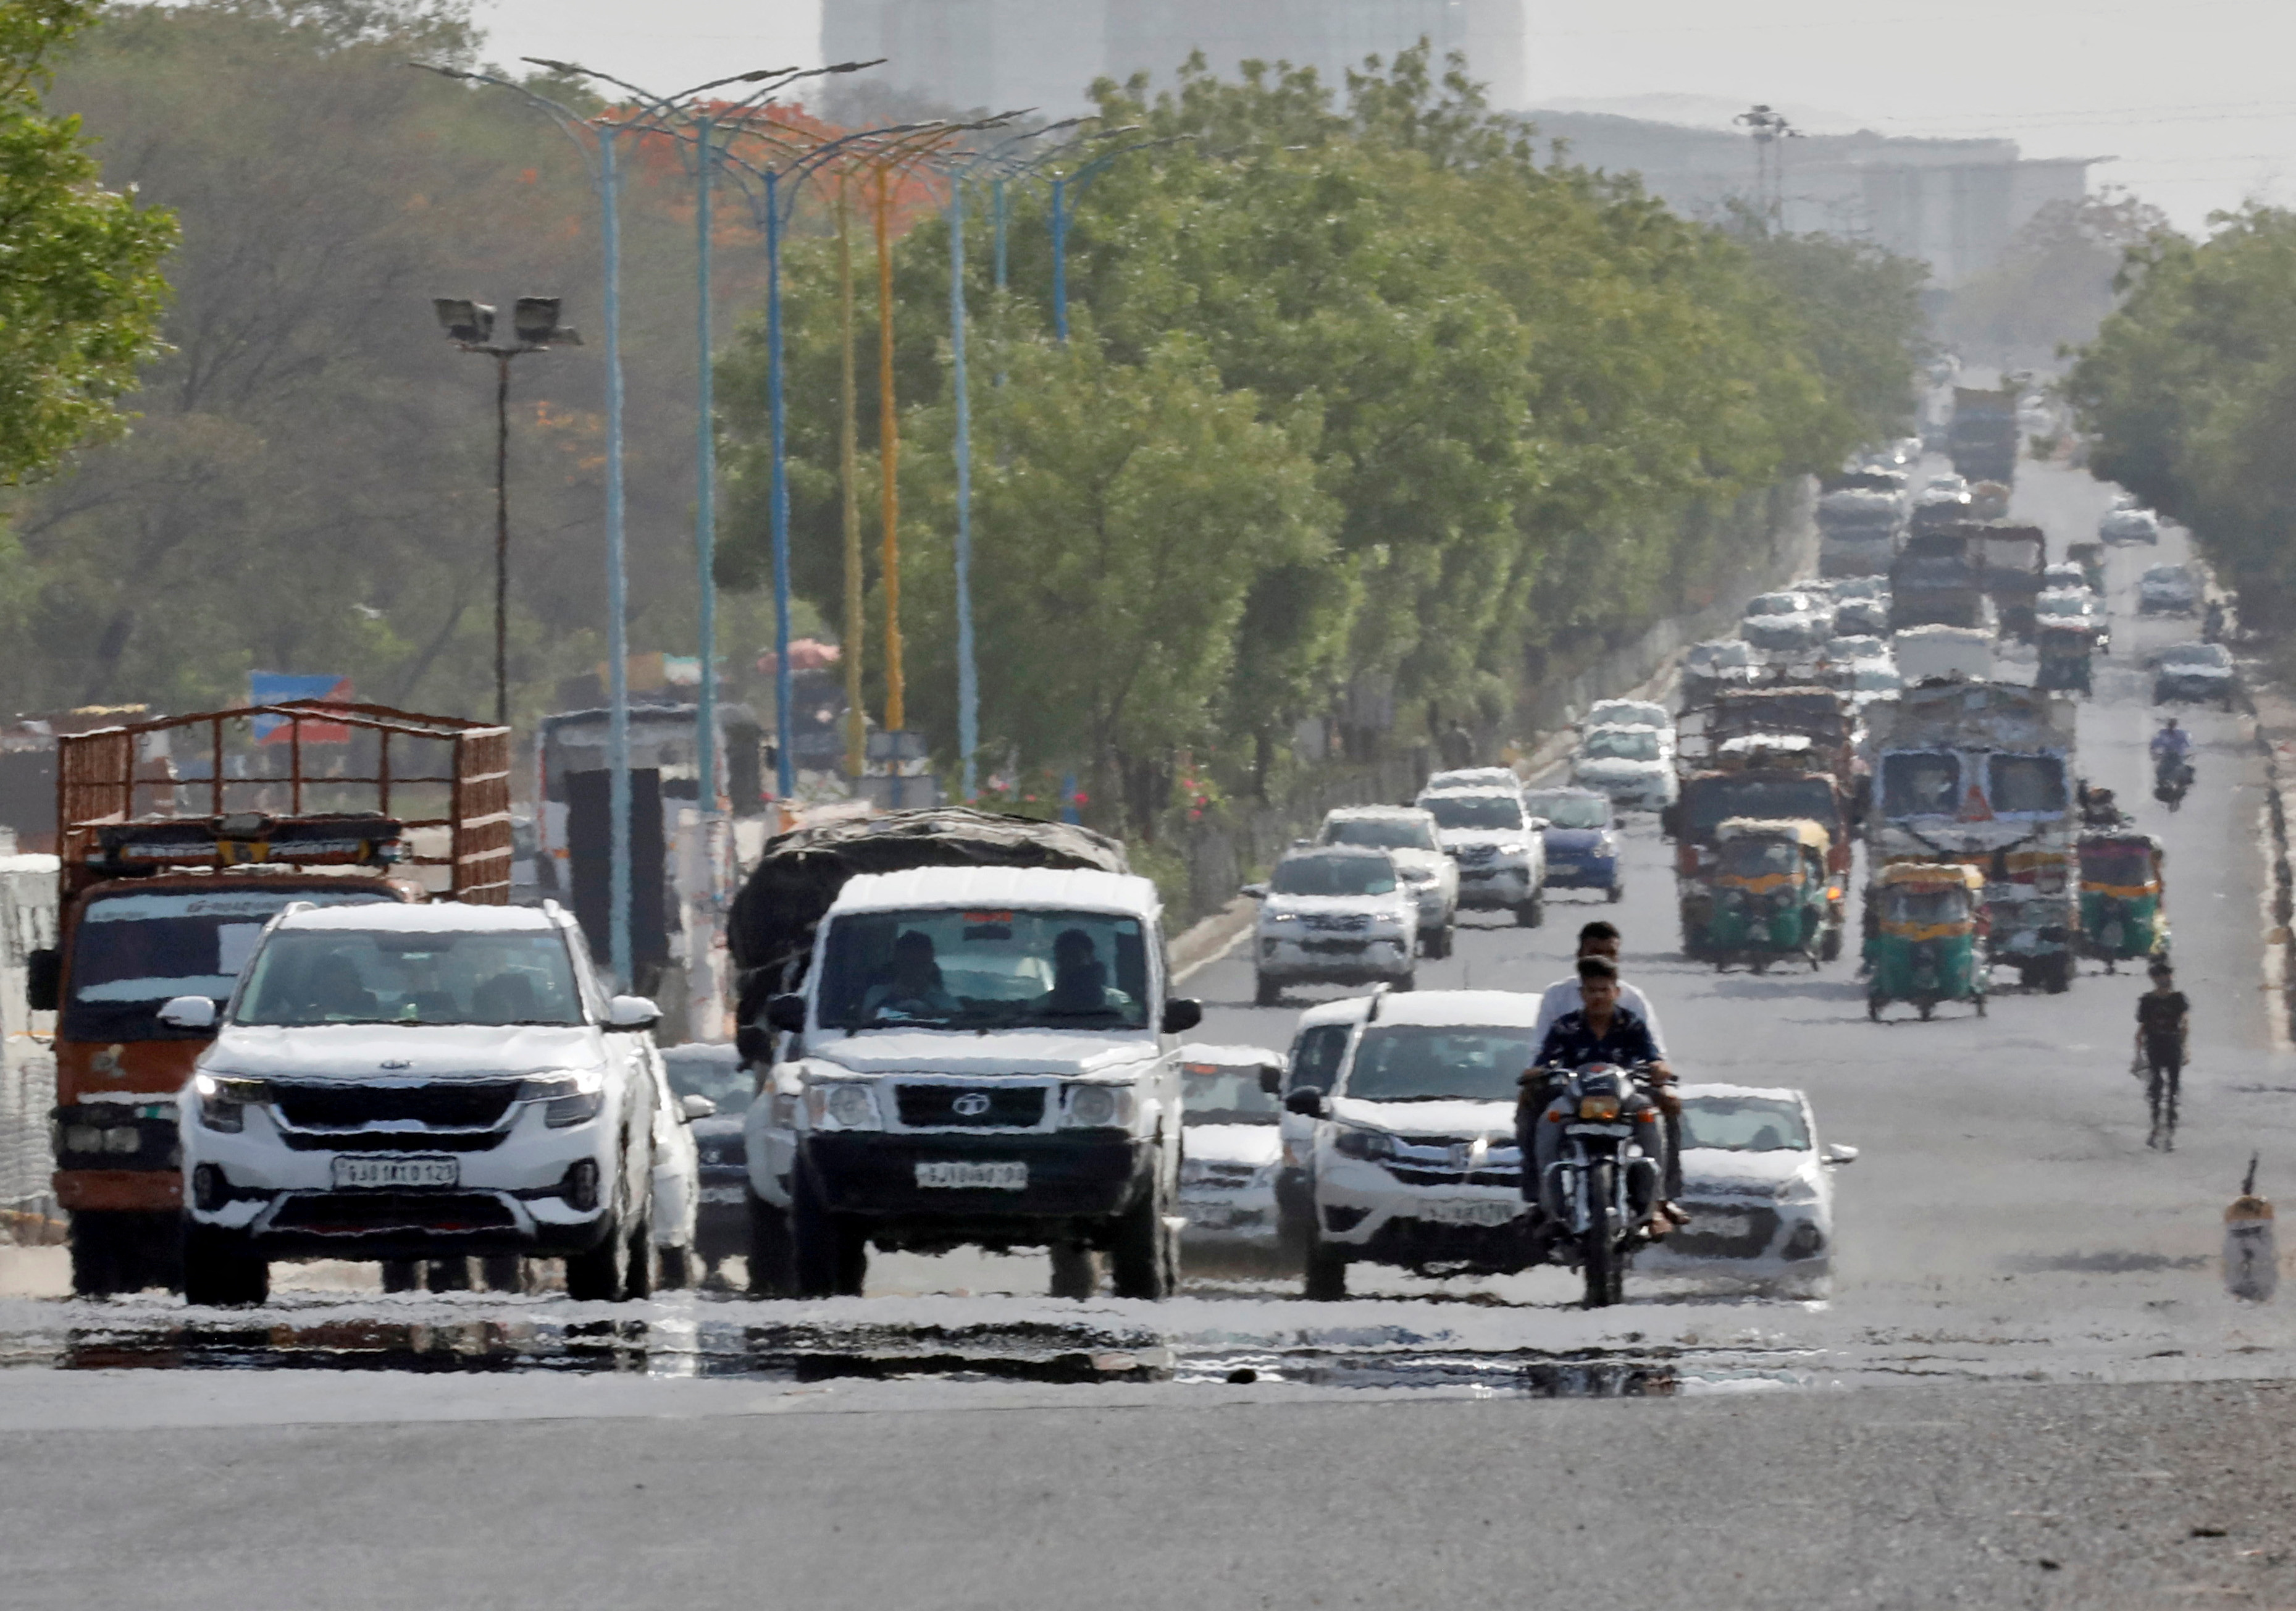 Traffic moves on a road in a heat haze during hot weather on the outskirts of Ahmedabad,